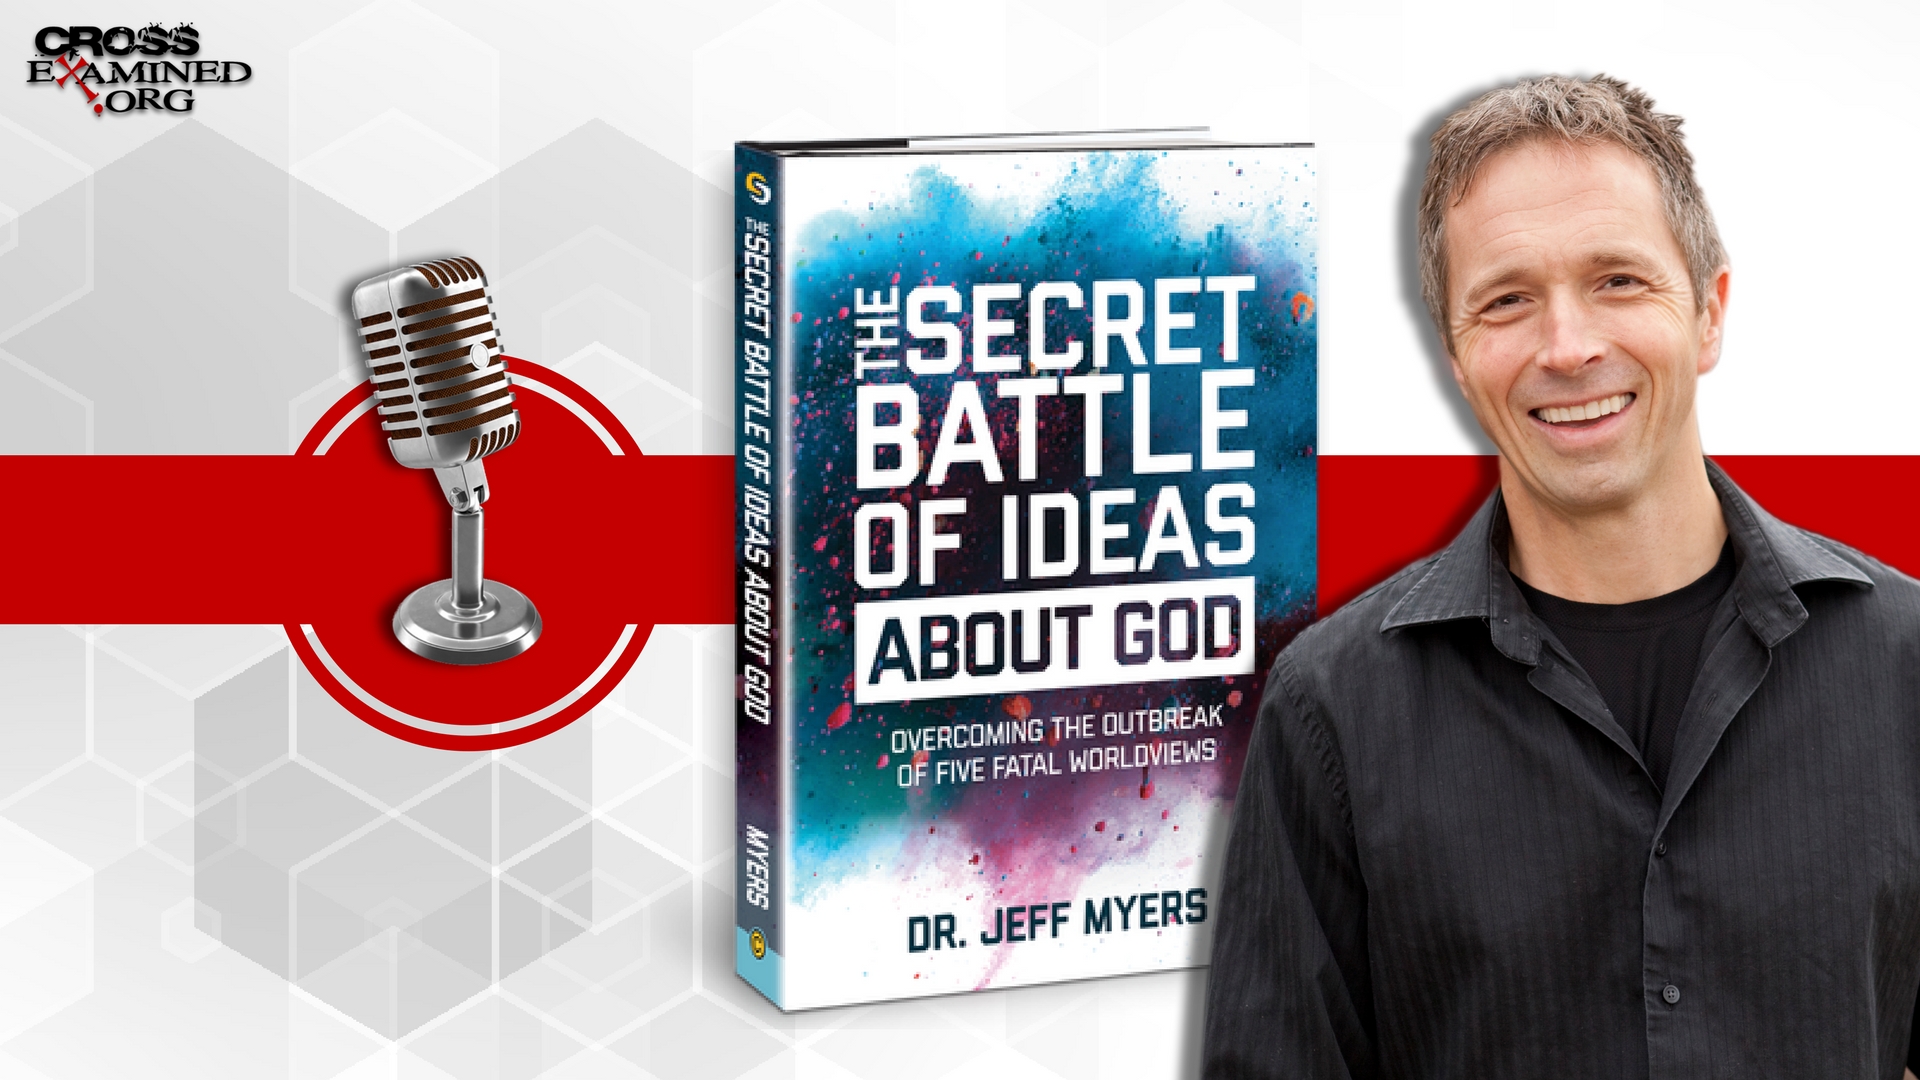 The Secret Battle of Ideas About God with Dr. Jeff Myers